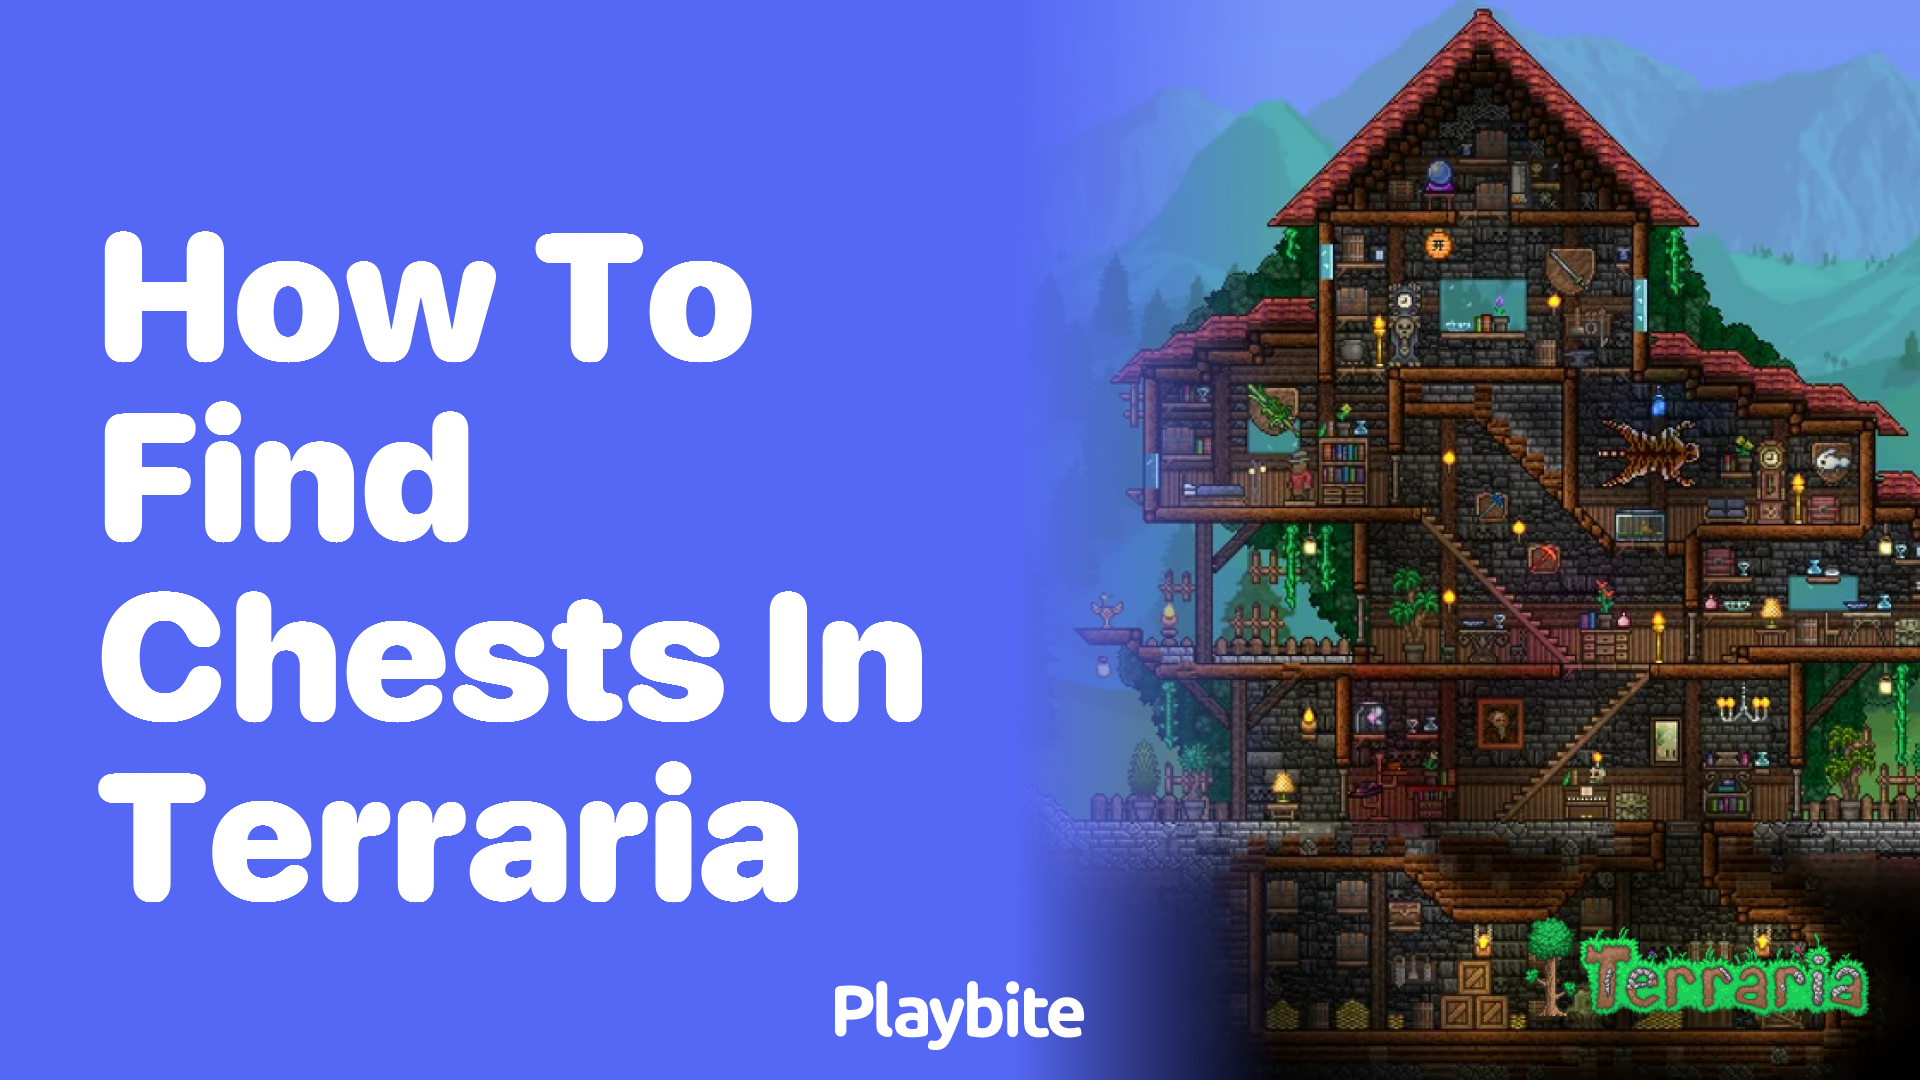 How to find chests in Terraria